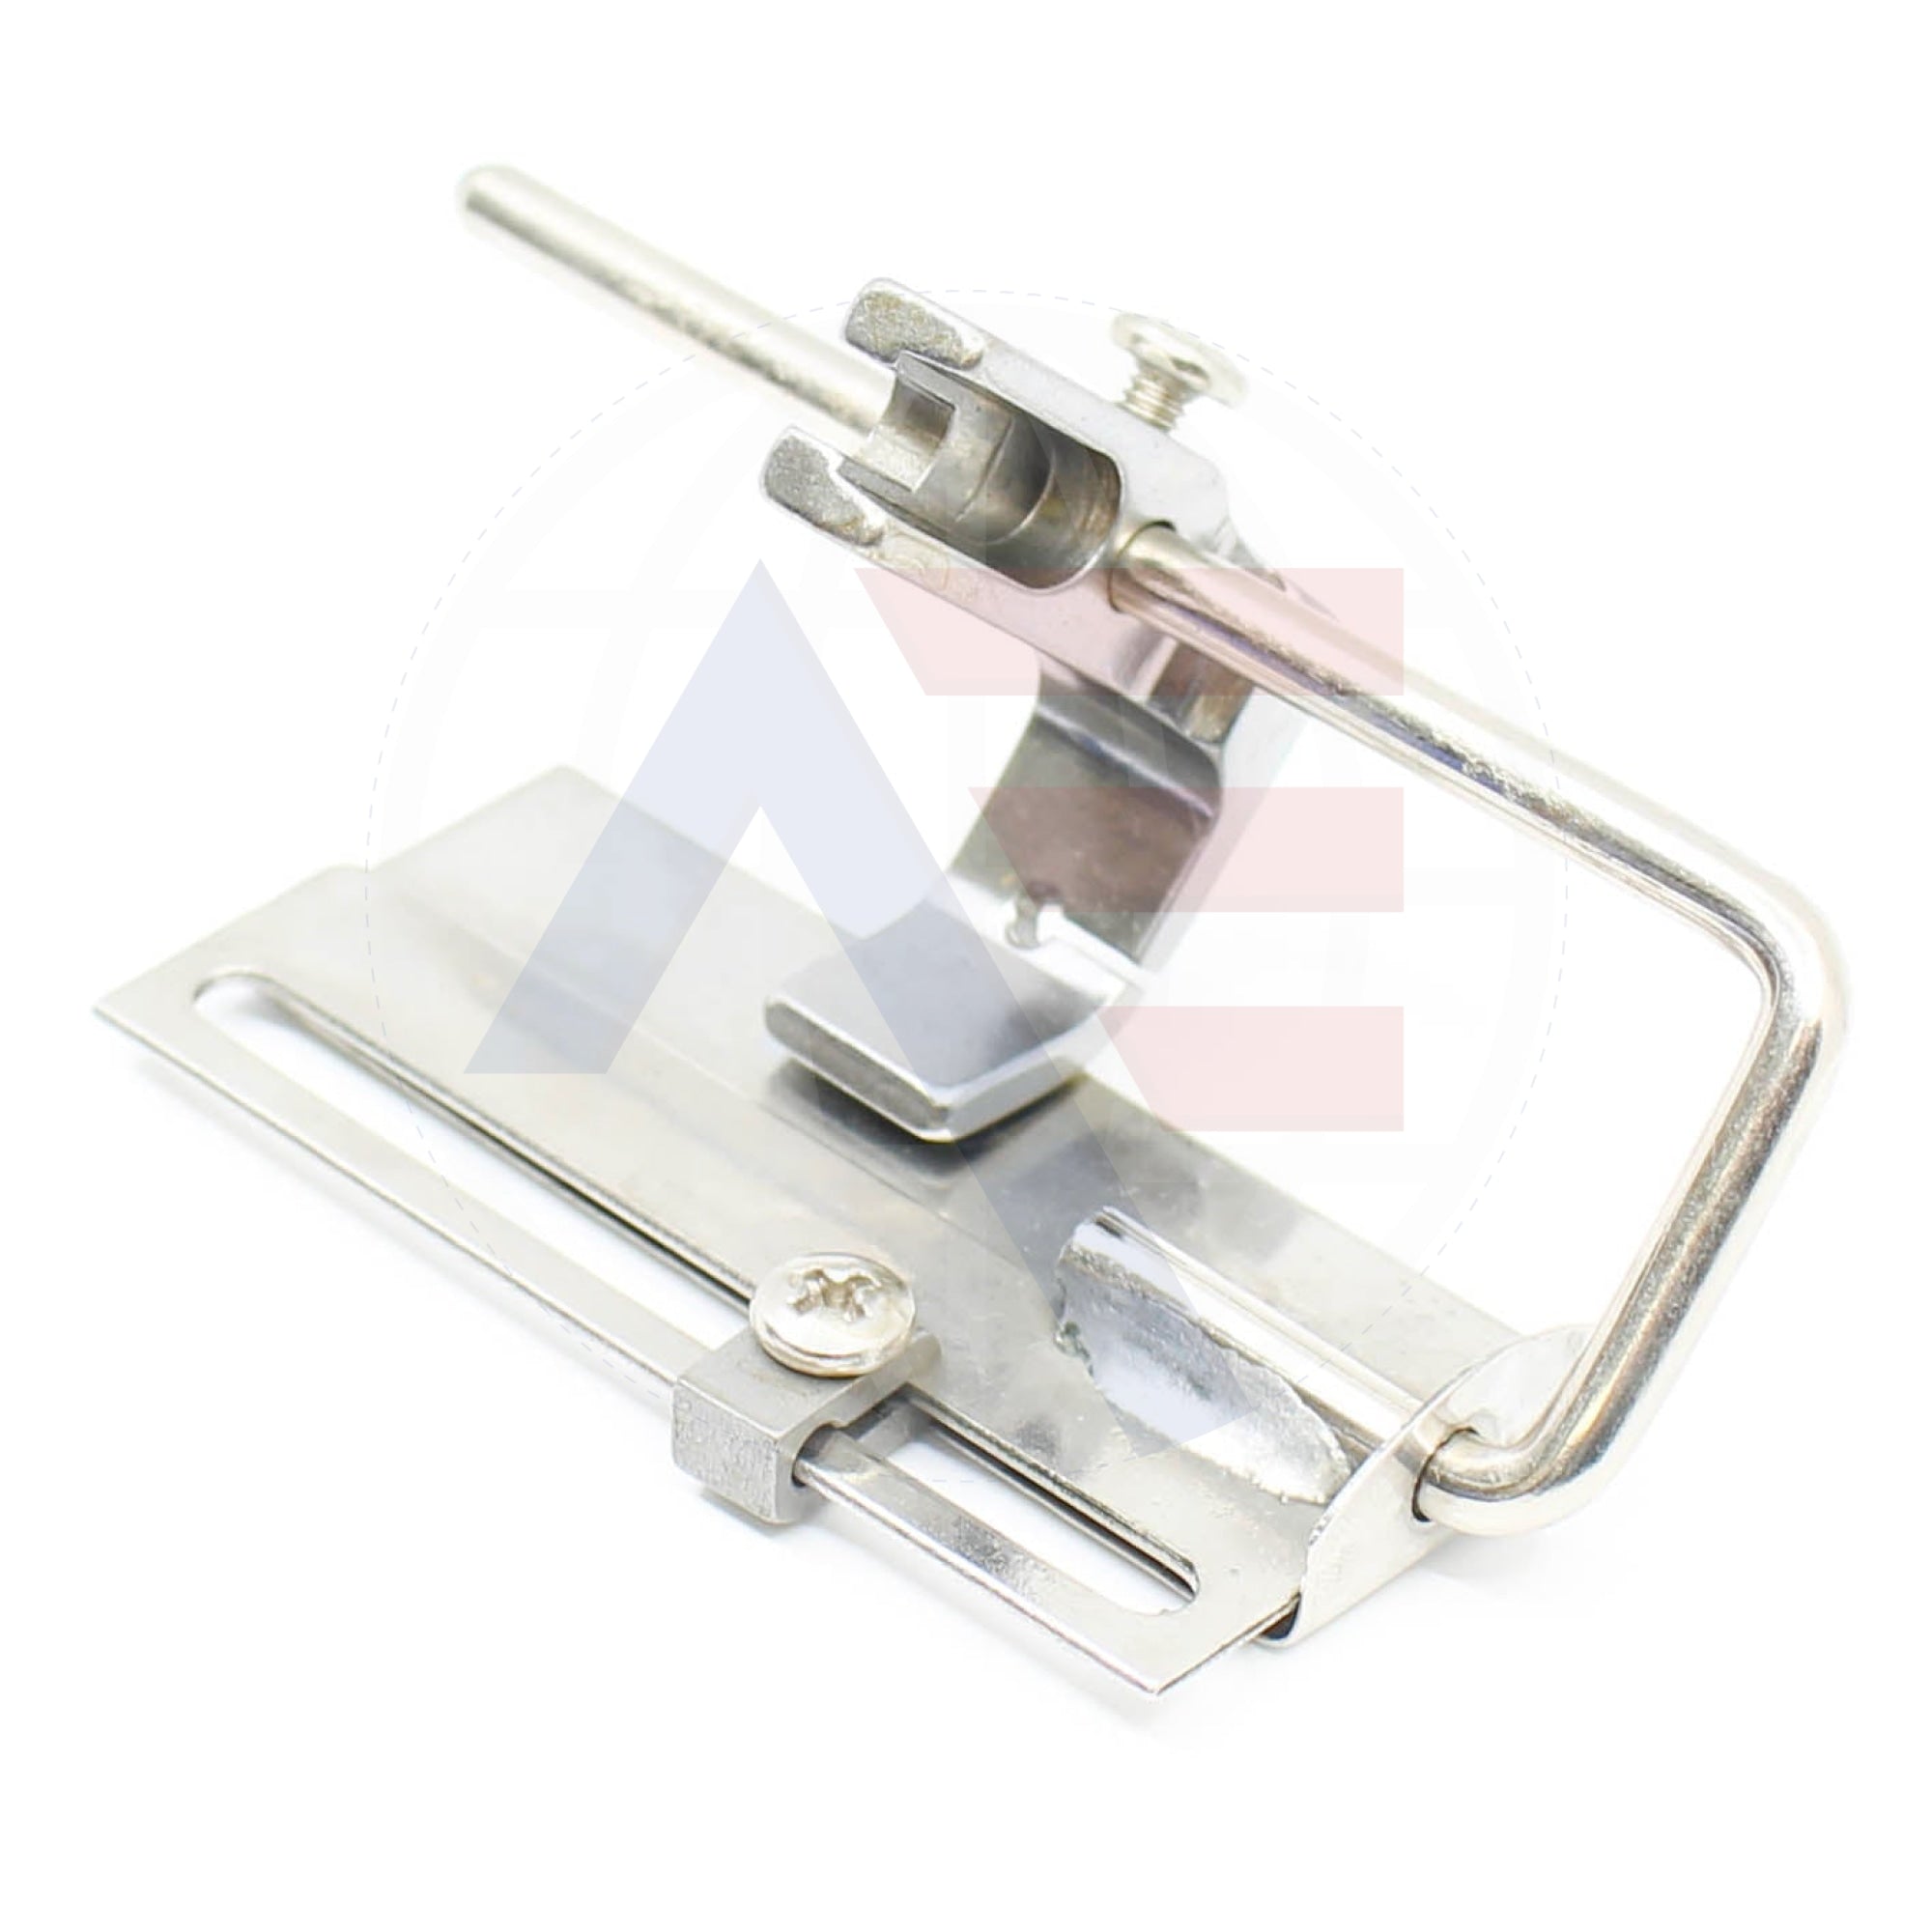 S534 Adjustable Tape Foot Sewing Machine Spare Parts